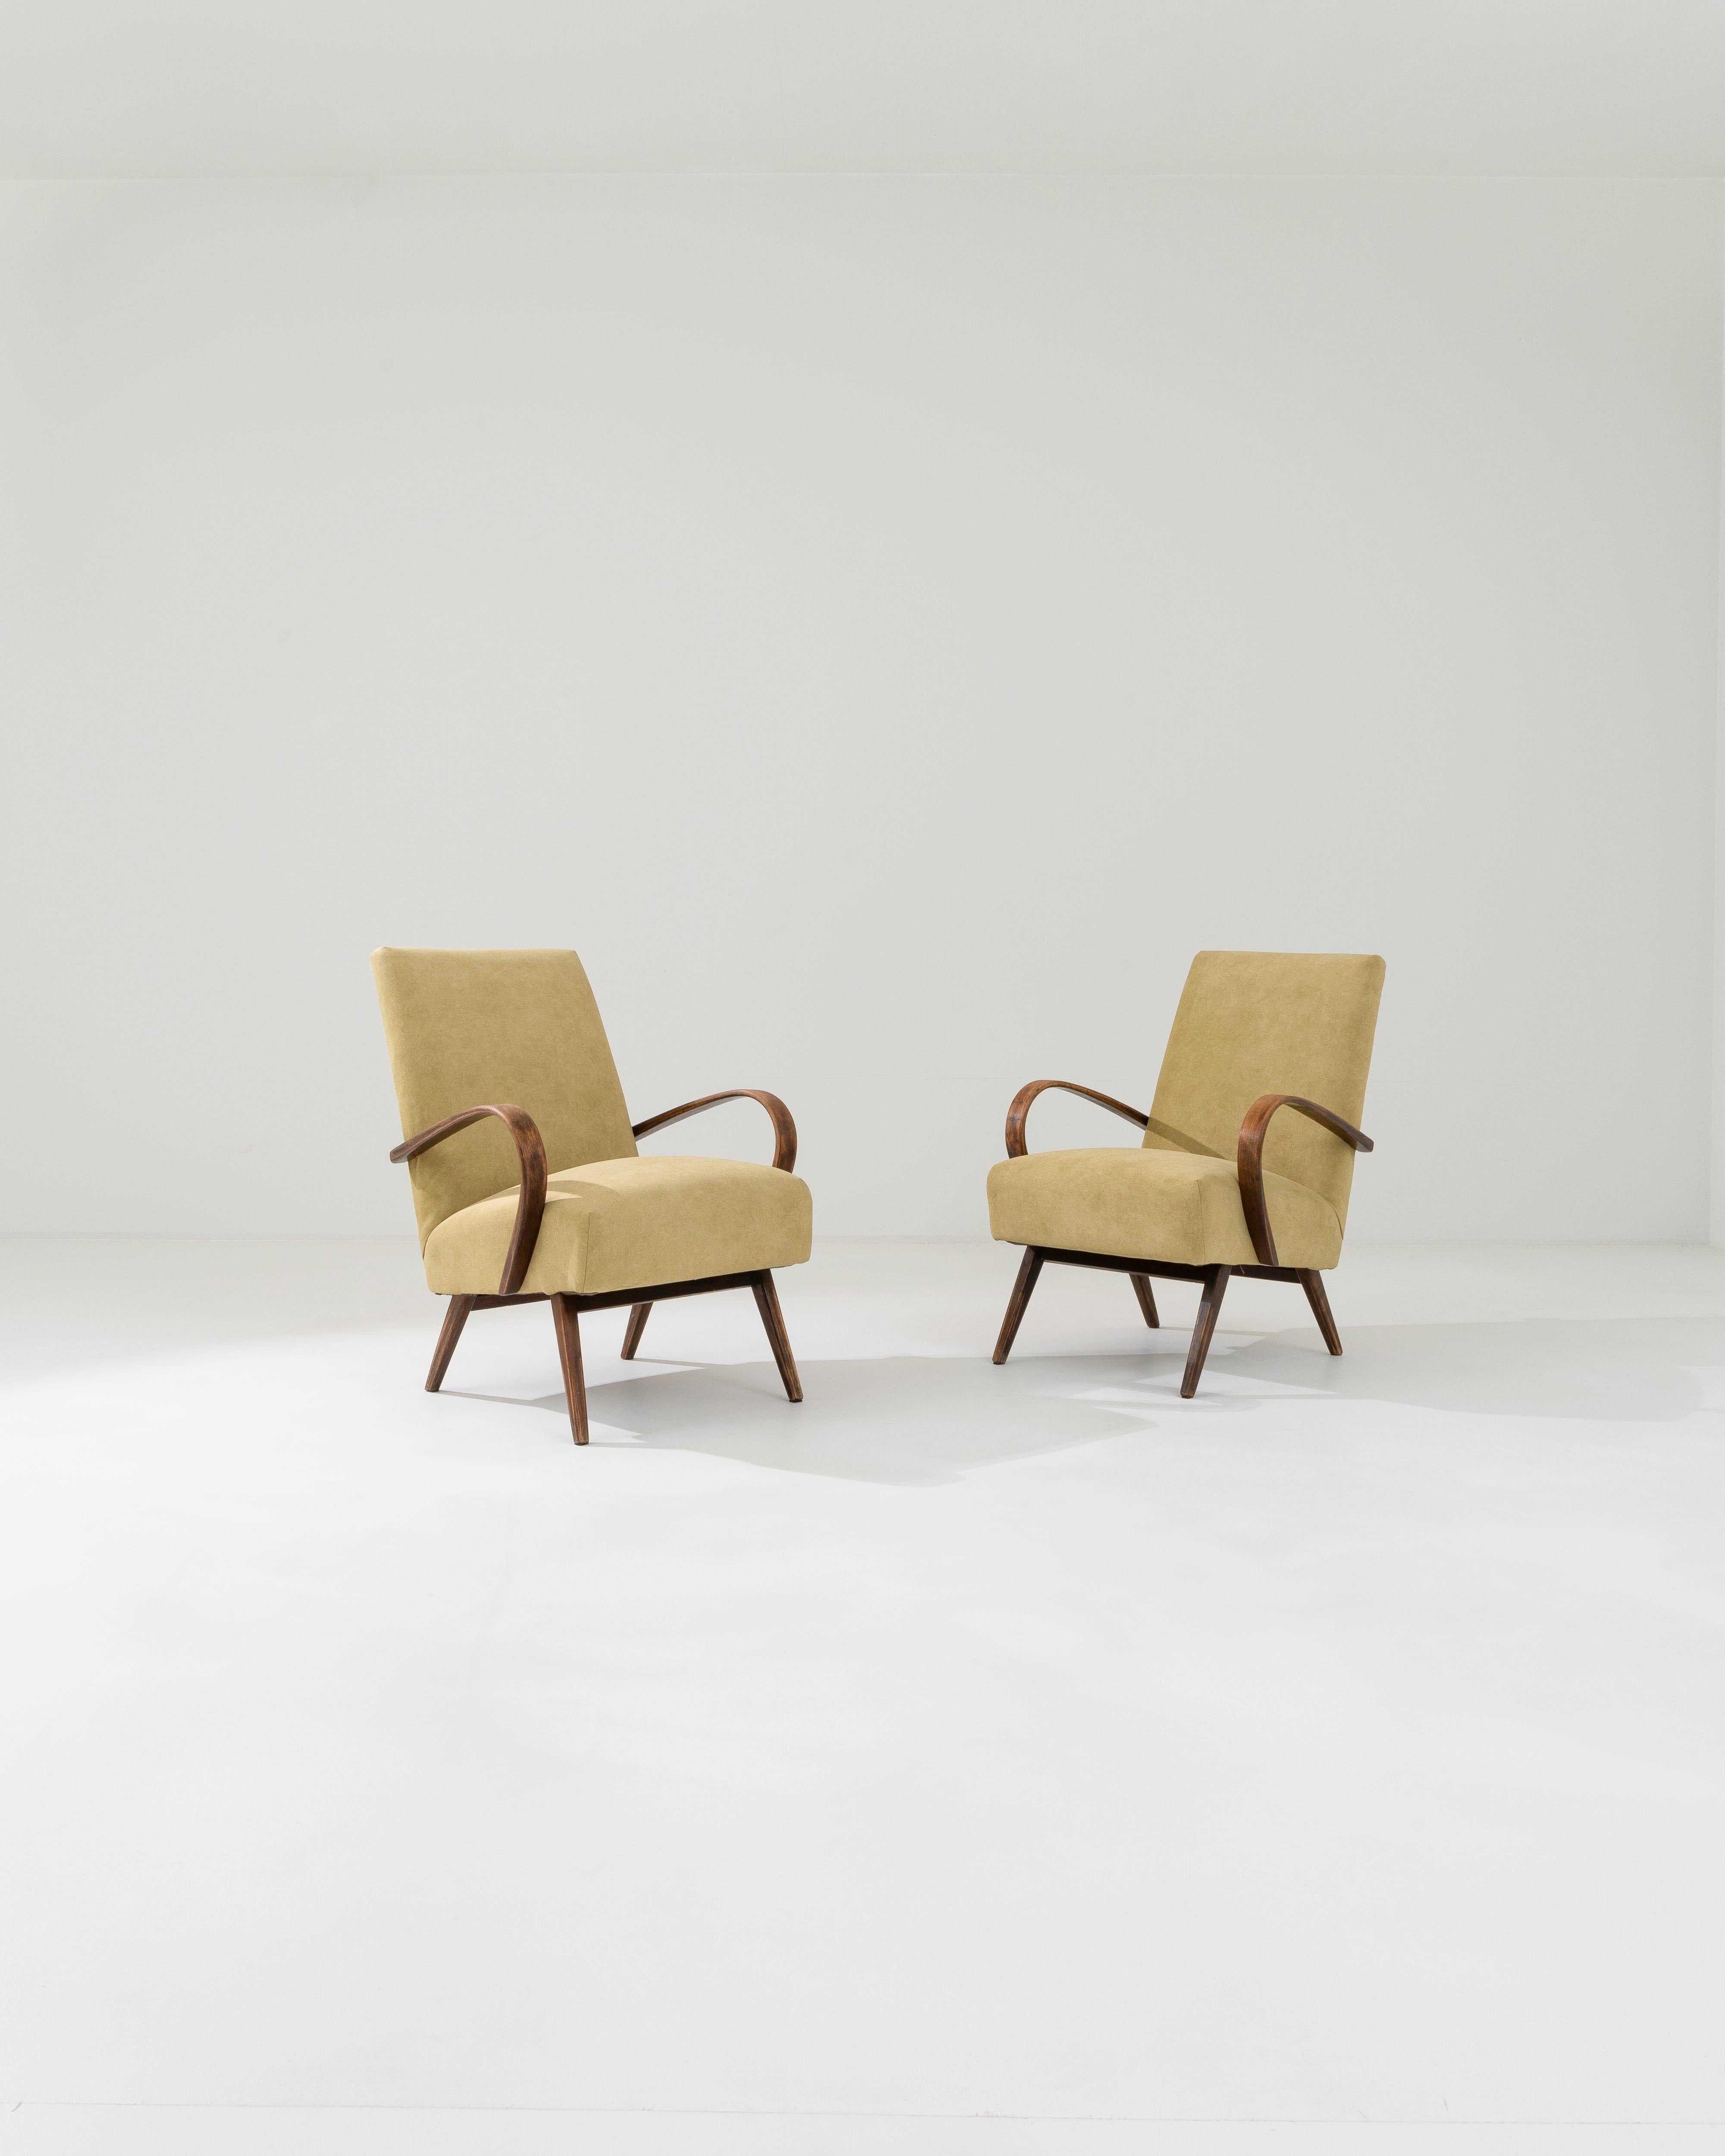 Produced in the former Czechoslovakia, this pair of bentwood armchairs from circa 1950 are re-upholstered with an updated ochre fabric. The upholstery was chosen to compliment the vintage elegance of the hardwood frame. Warm yellow combines with the